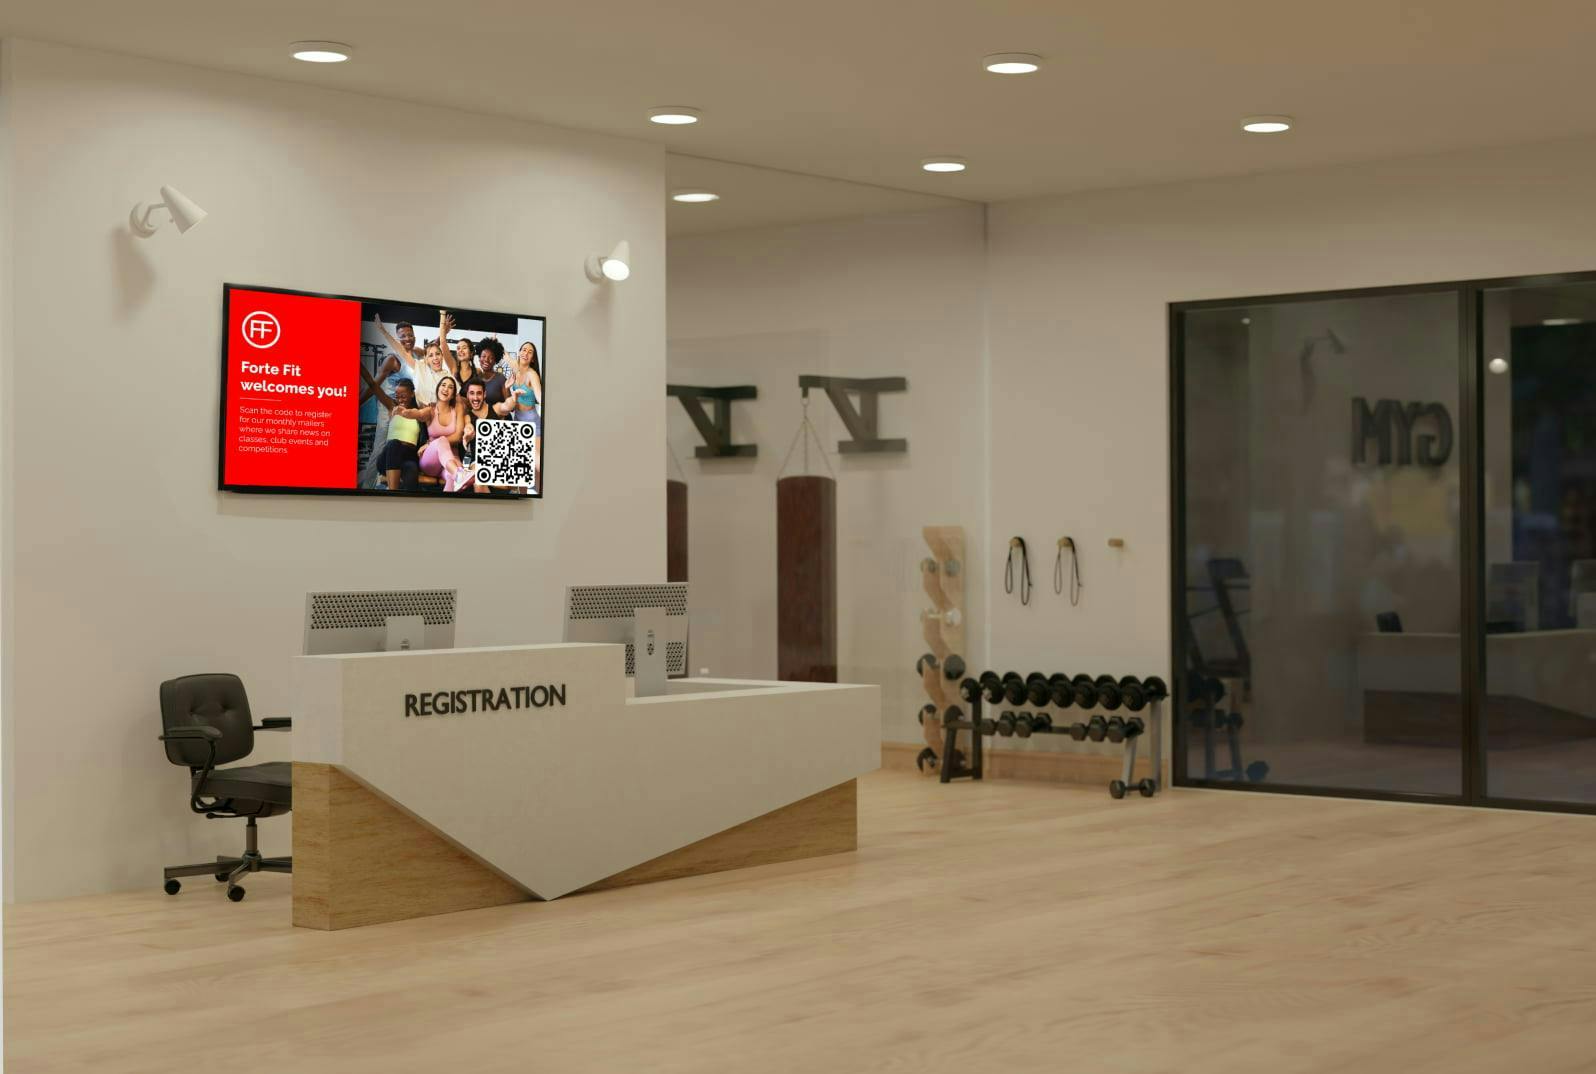 welcome board digital signage at a fitness center reception